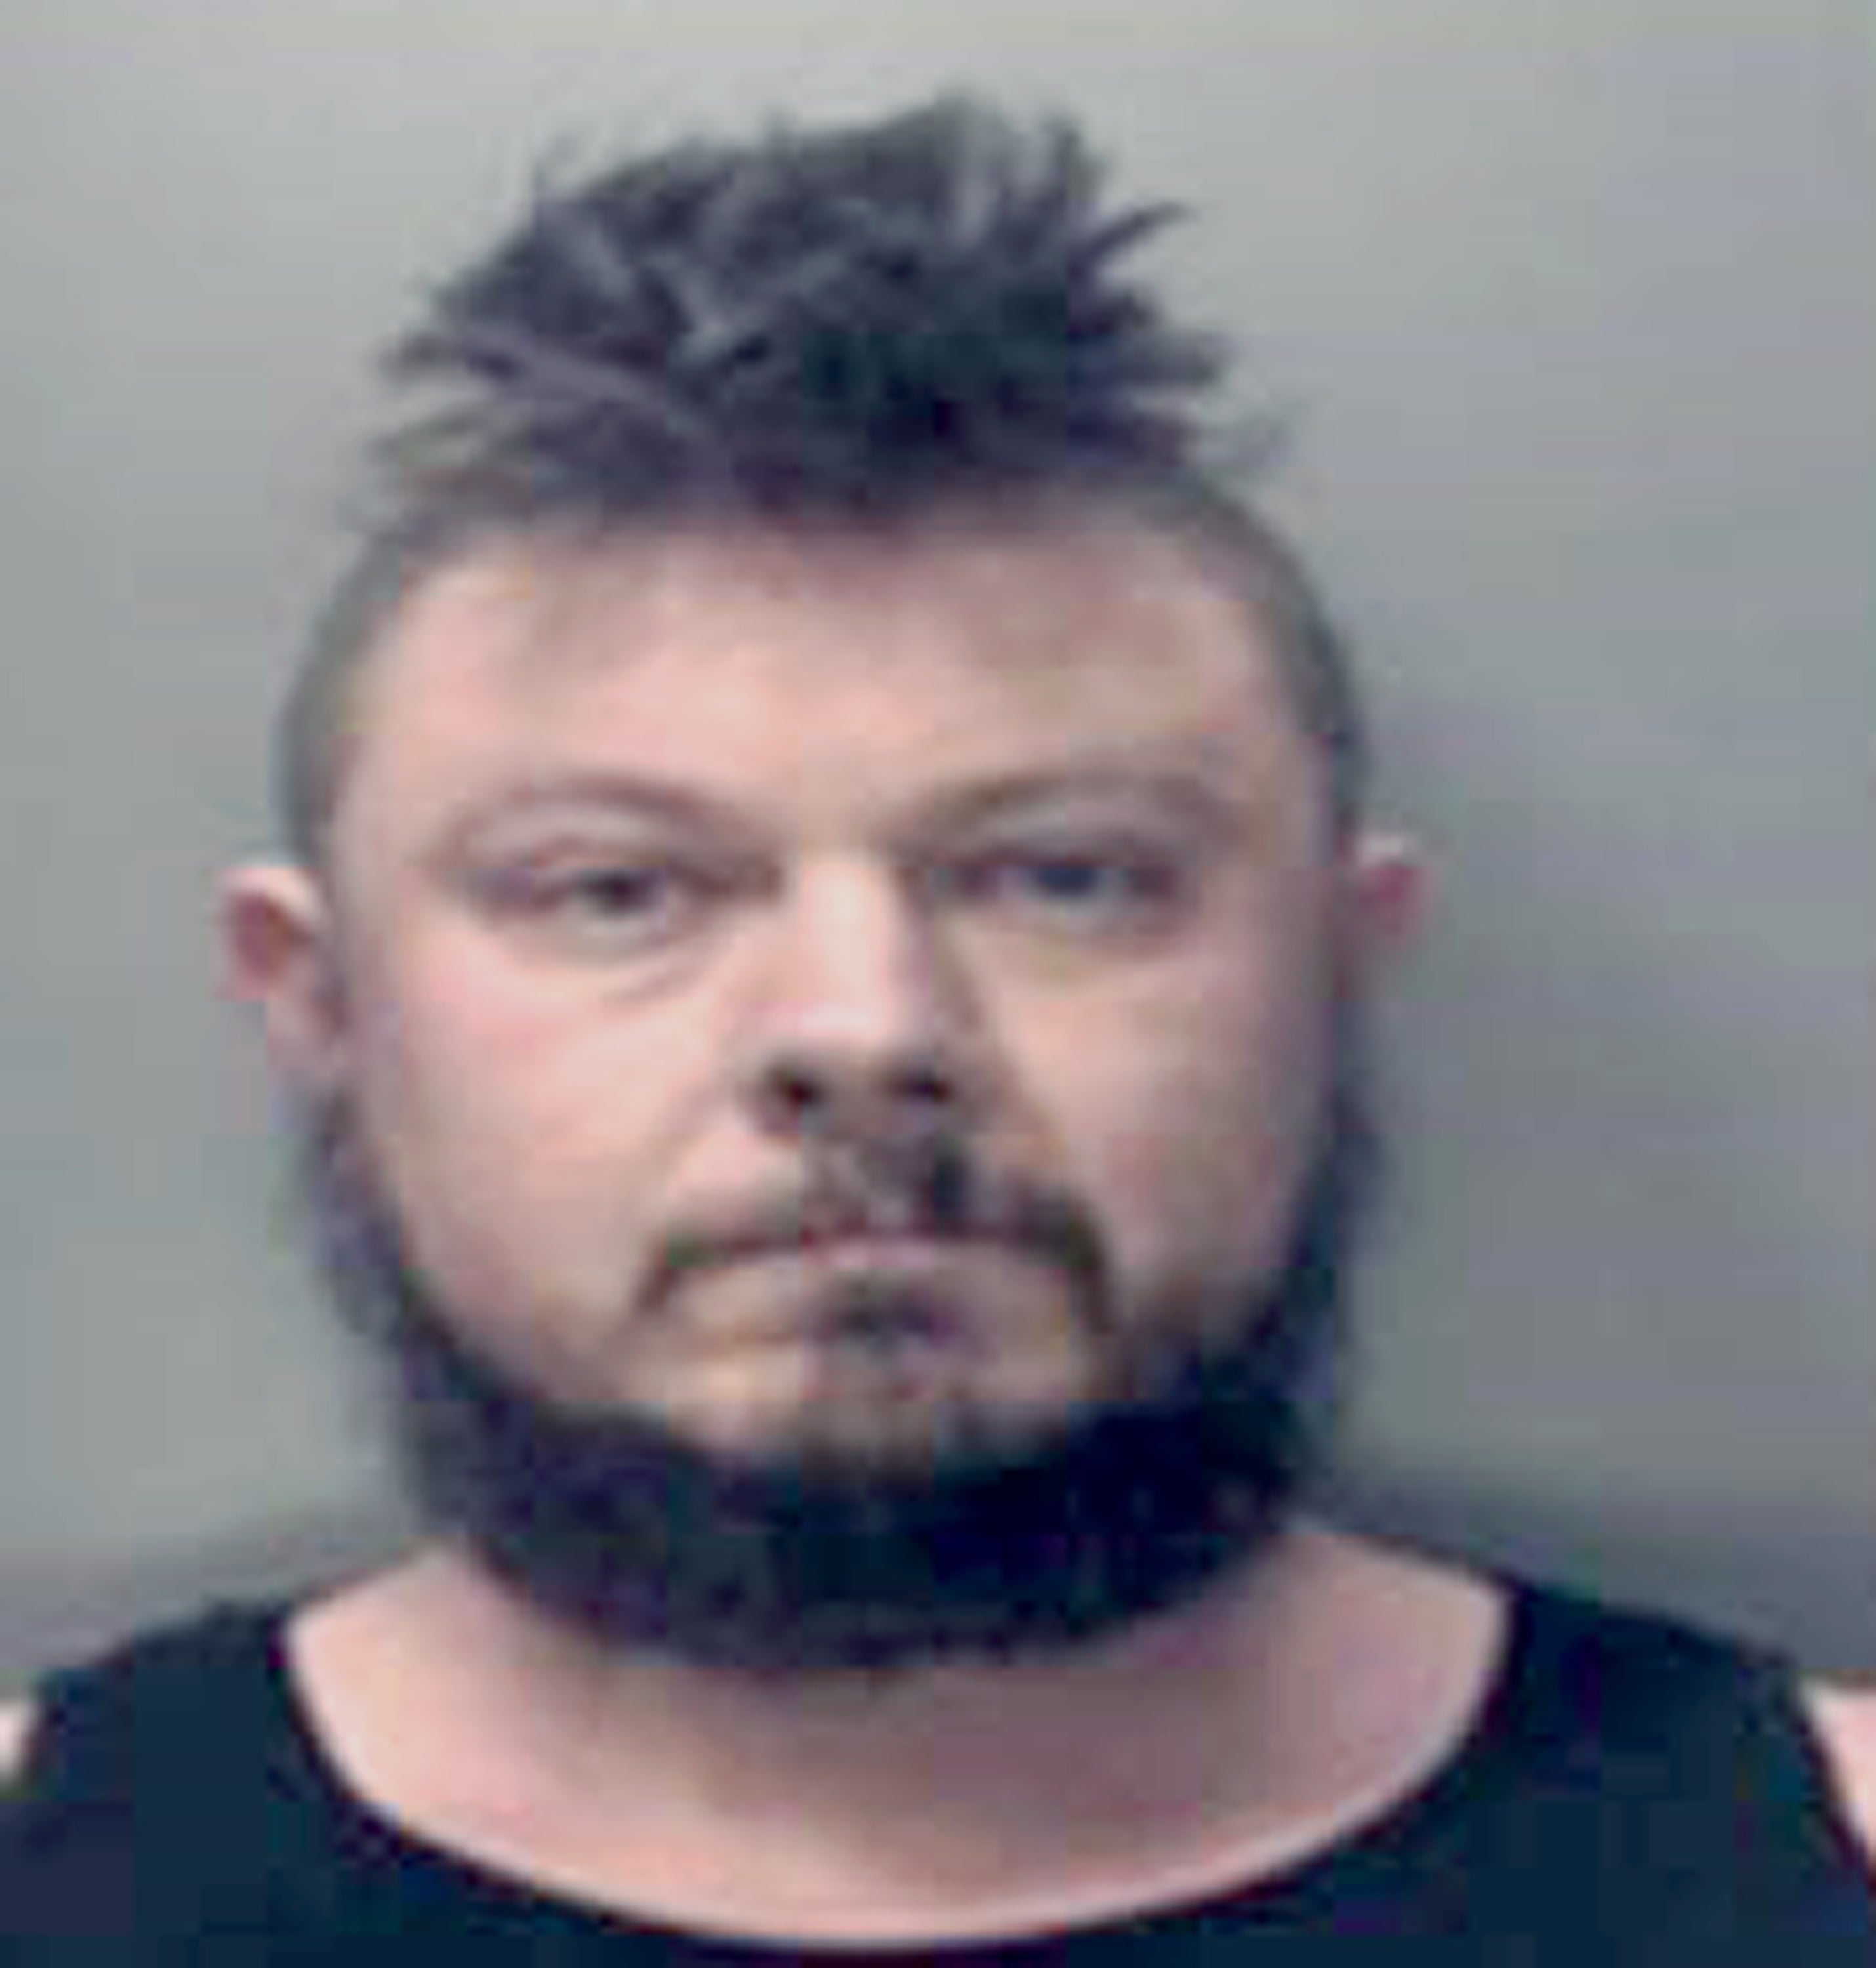 Janus Atkin, 38, of Newport, Gwent, who had been completing a veterinary course, was jailed for 12 years at the Old Bailey in London